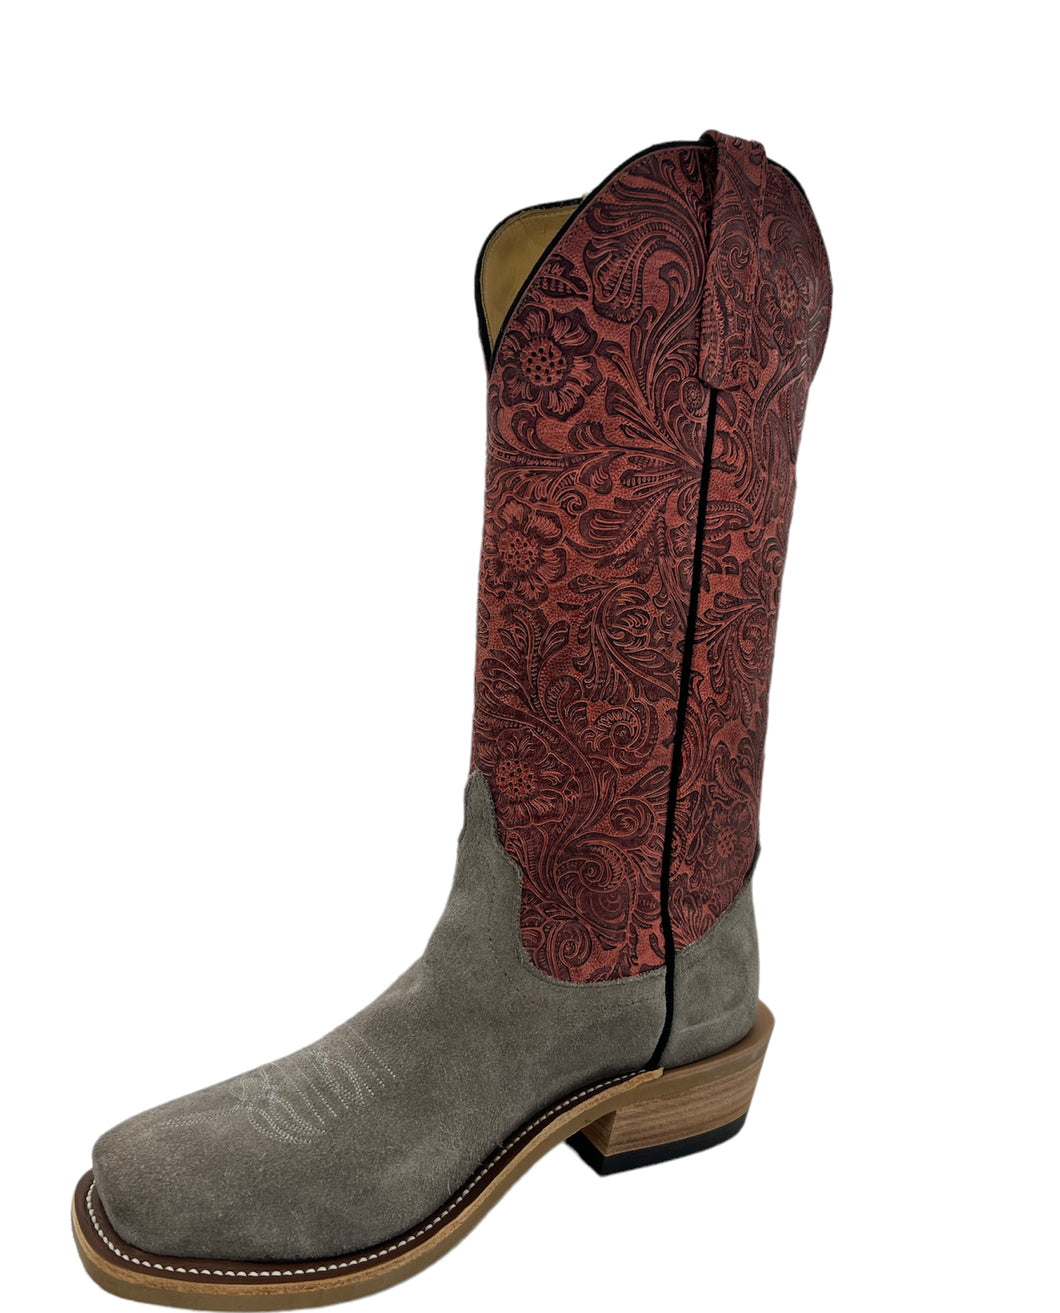 Anderson Bean Smoked Bacon Bryony Tooling Boots